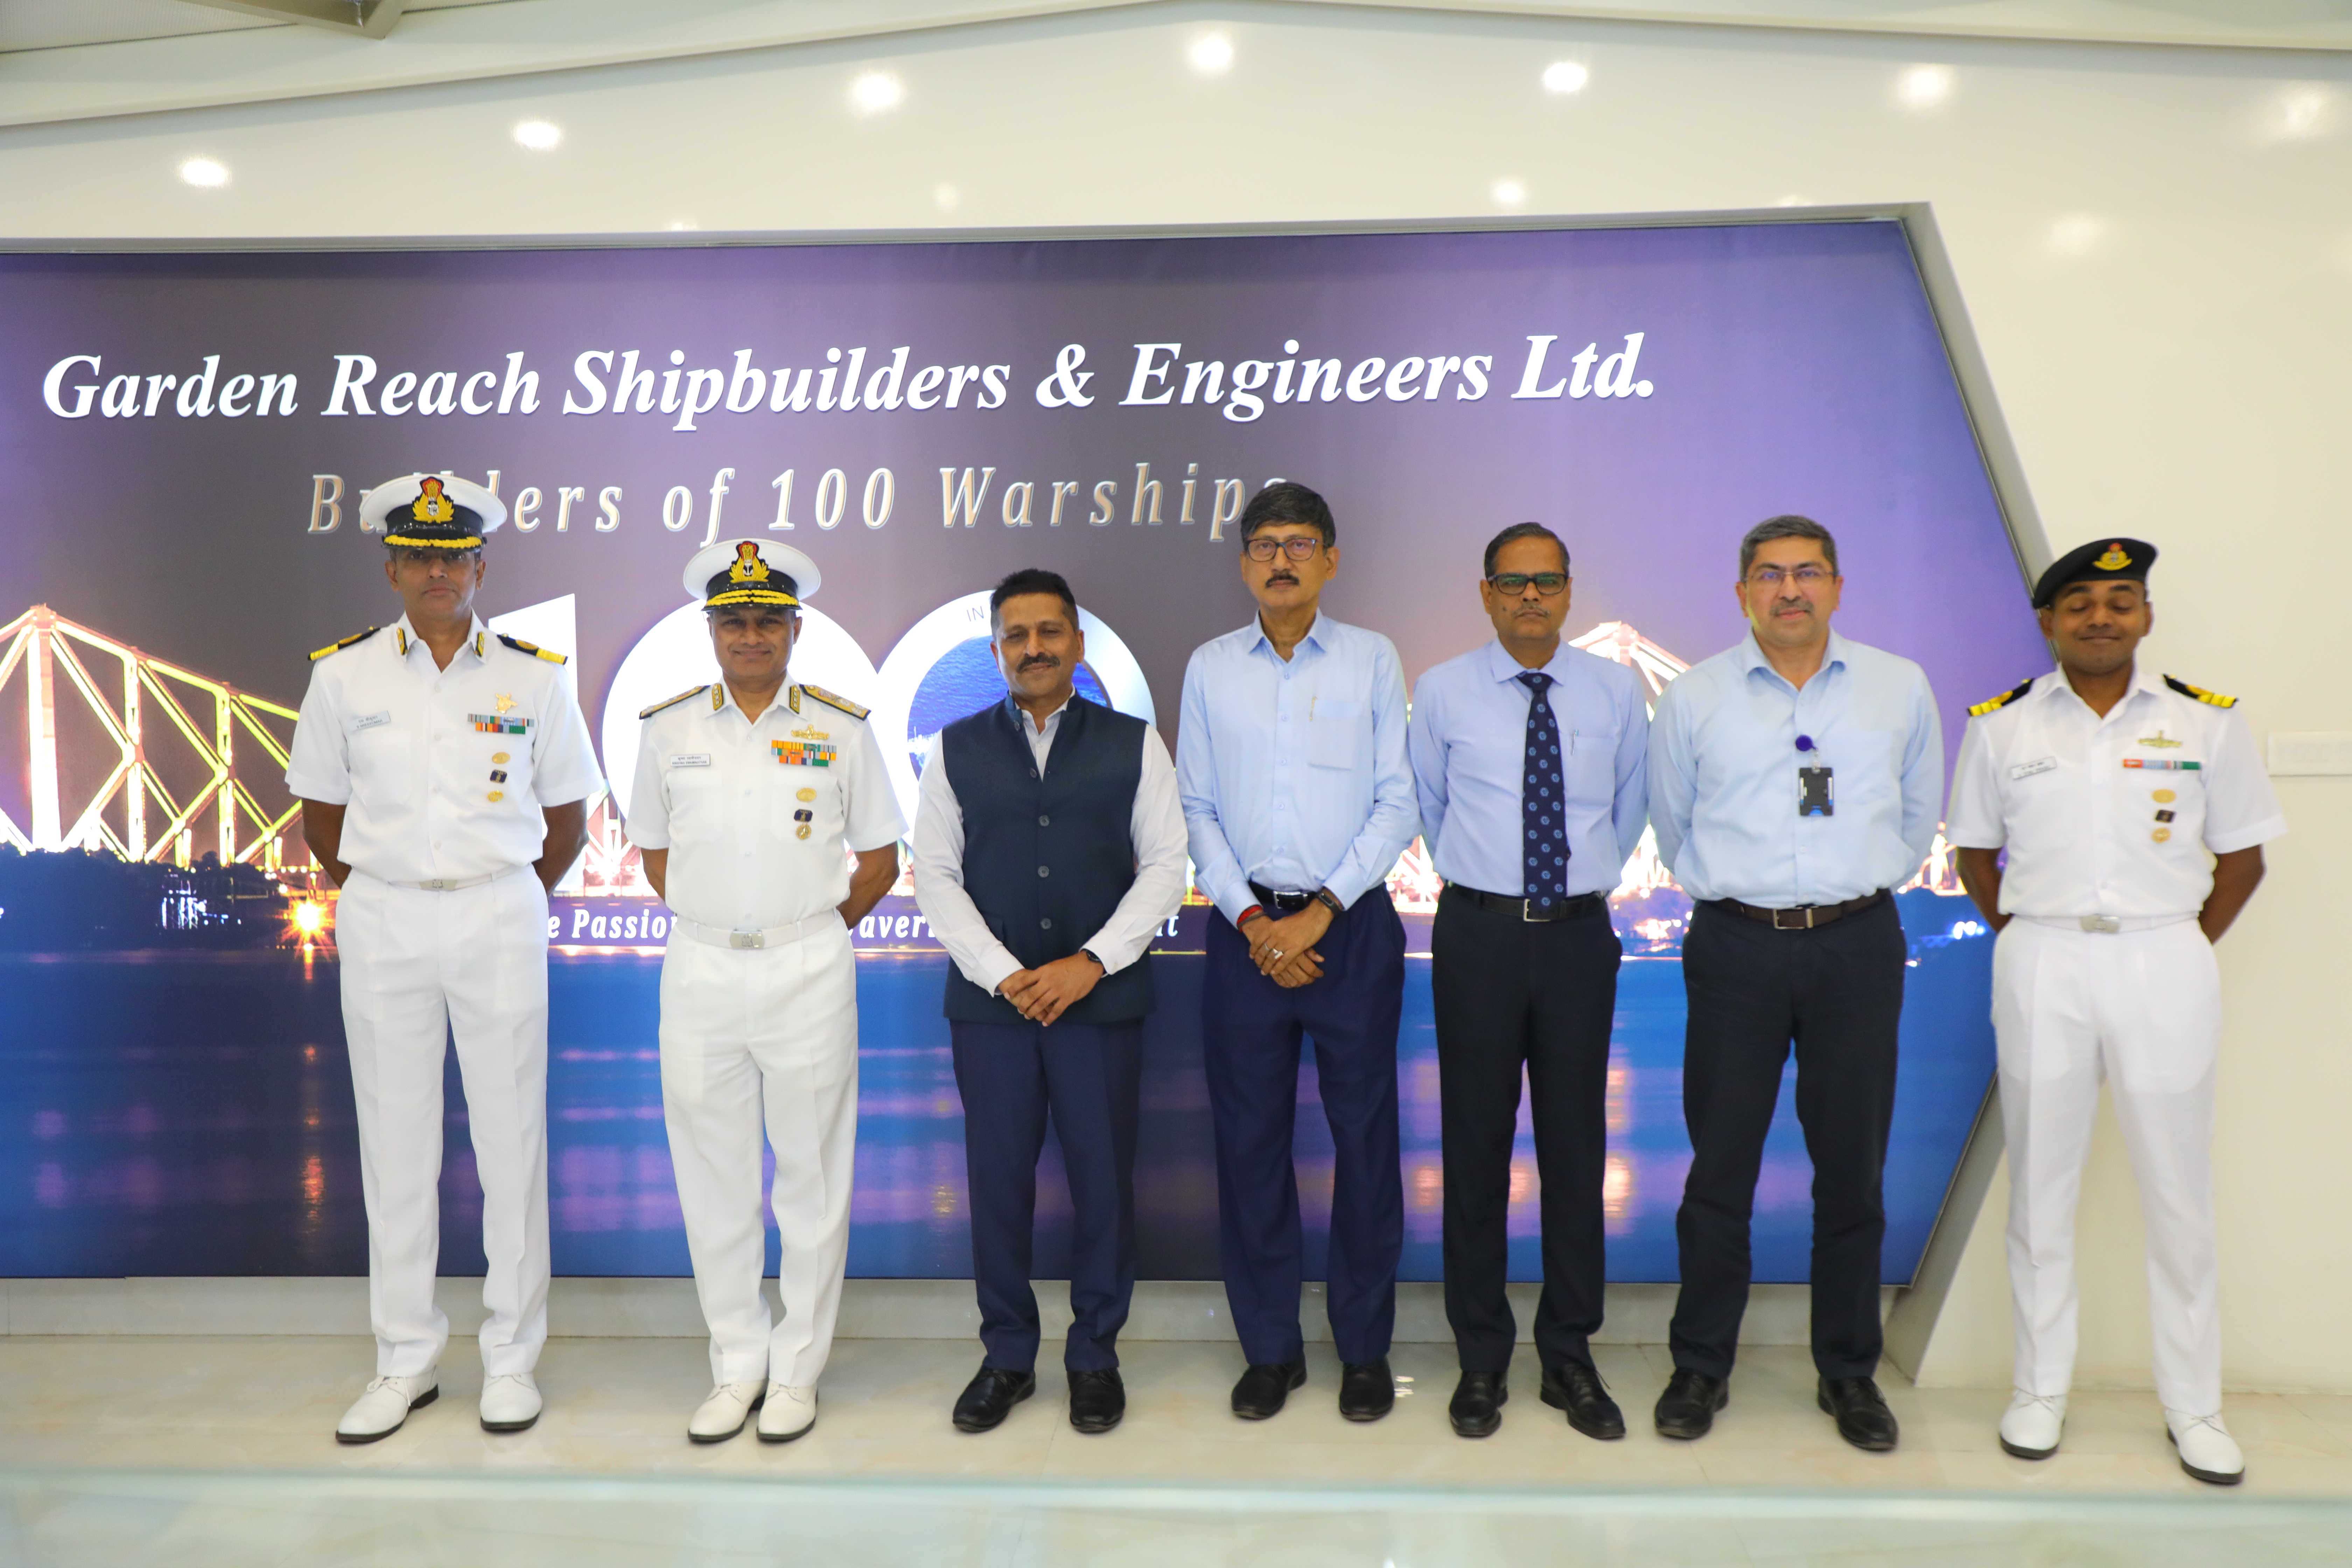 Visit of Vice Admiral Krishna Swaminathan, AVSM, VSM, Chief of Personnel on 30 Oct 23